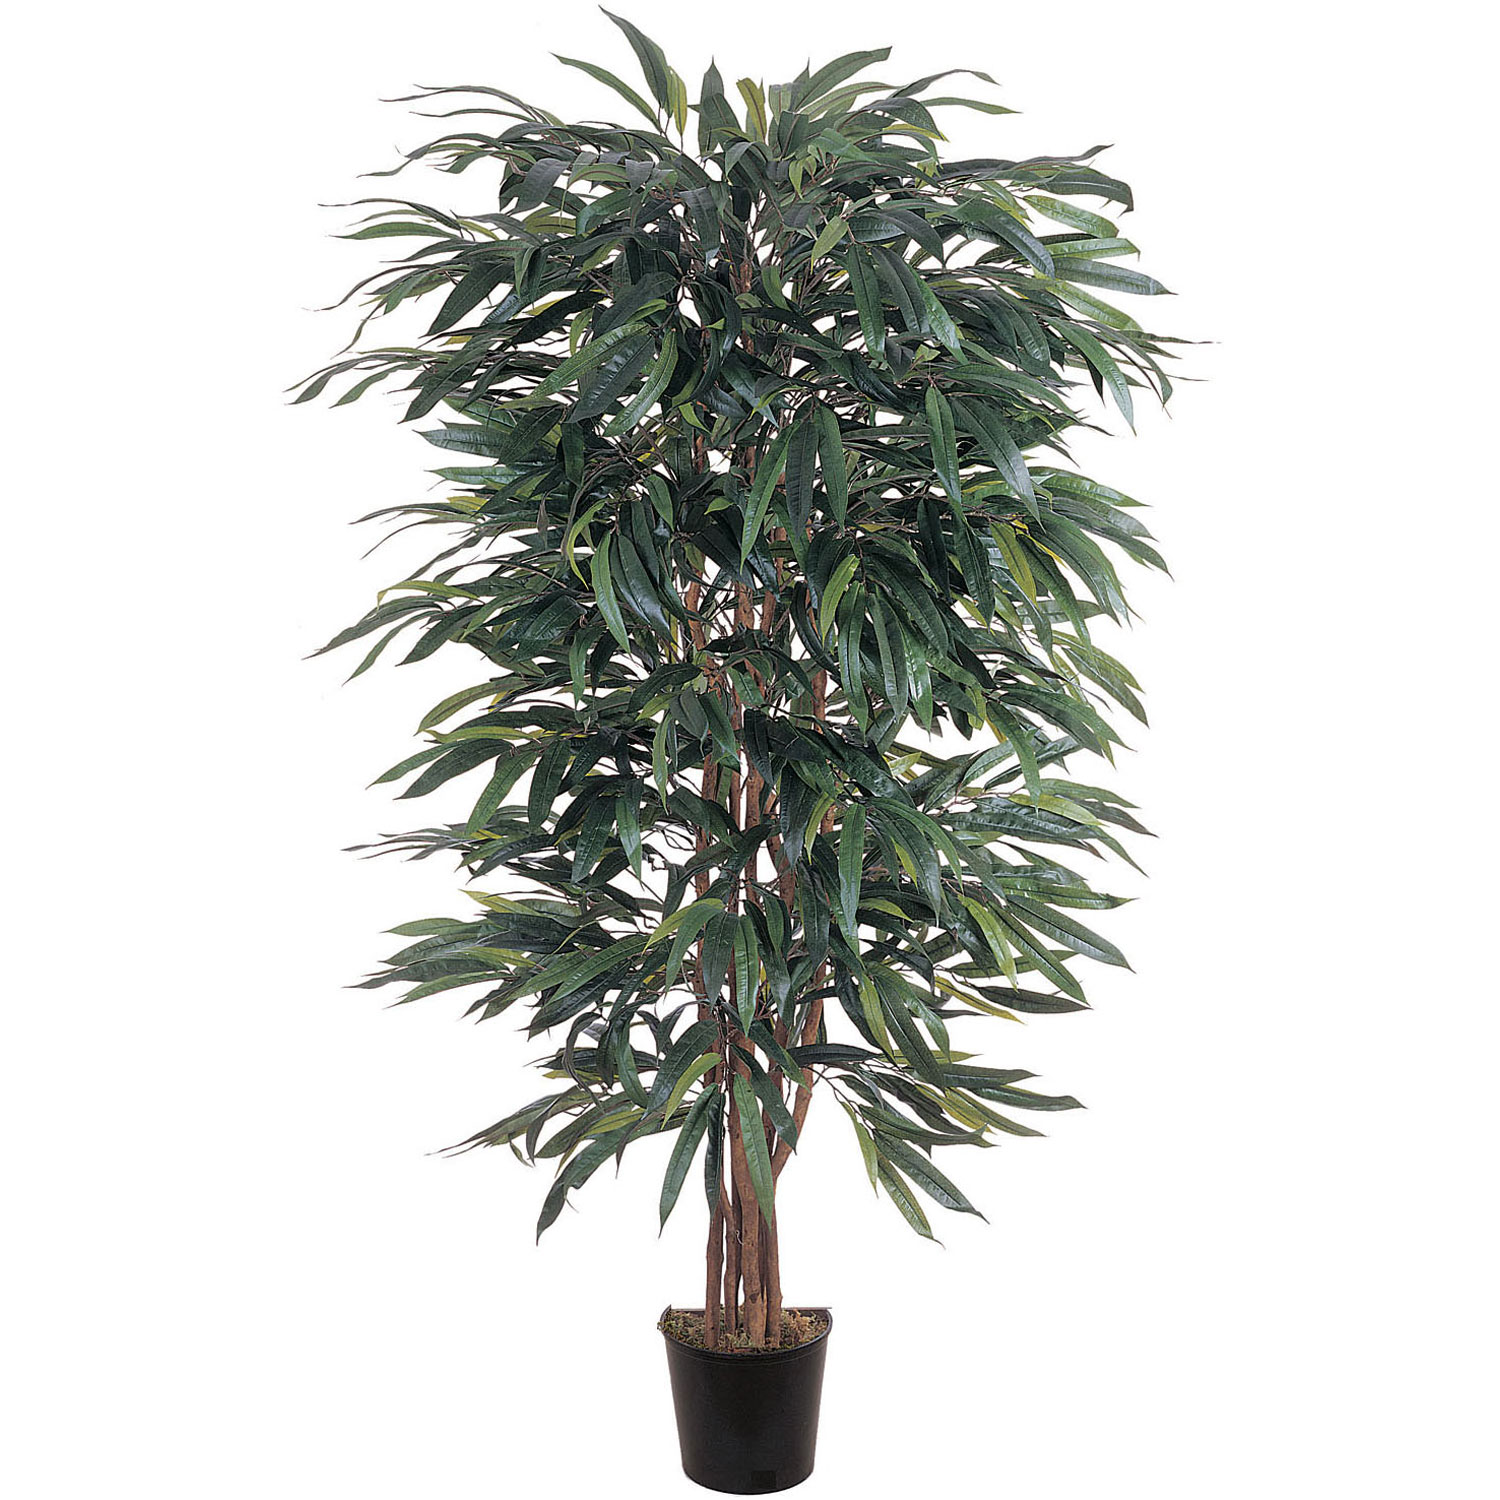 5 Foot Weeping Ficus Tree: Potted